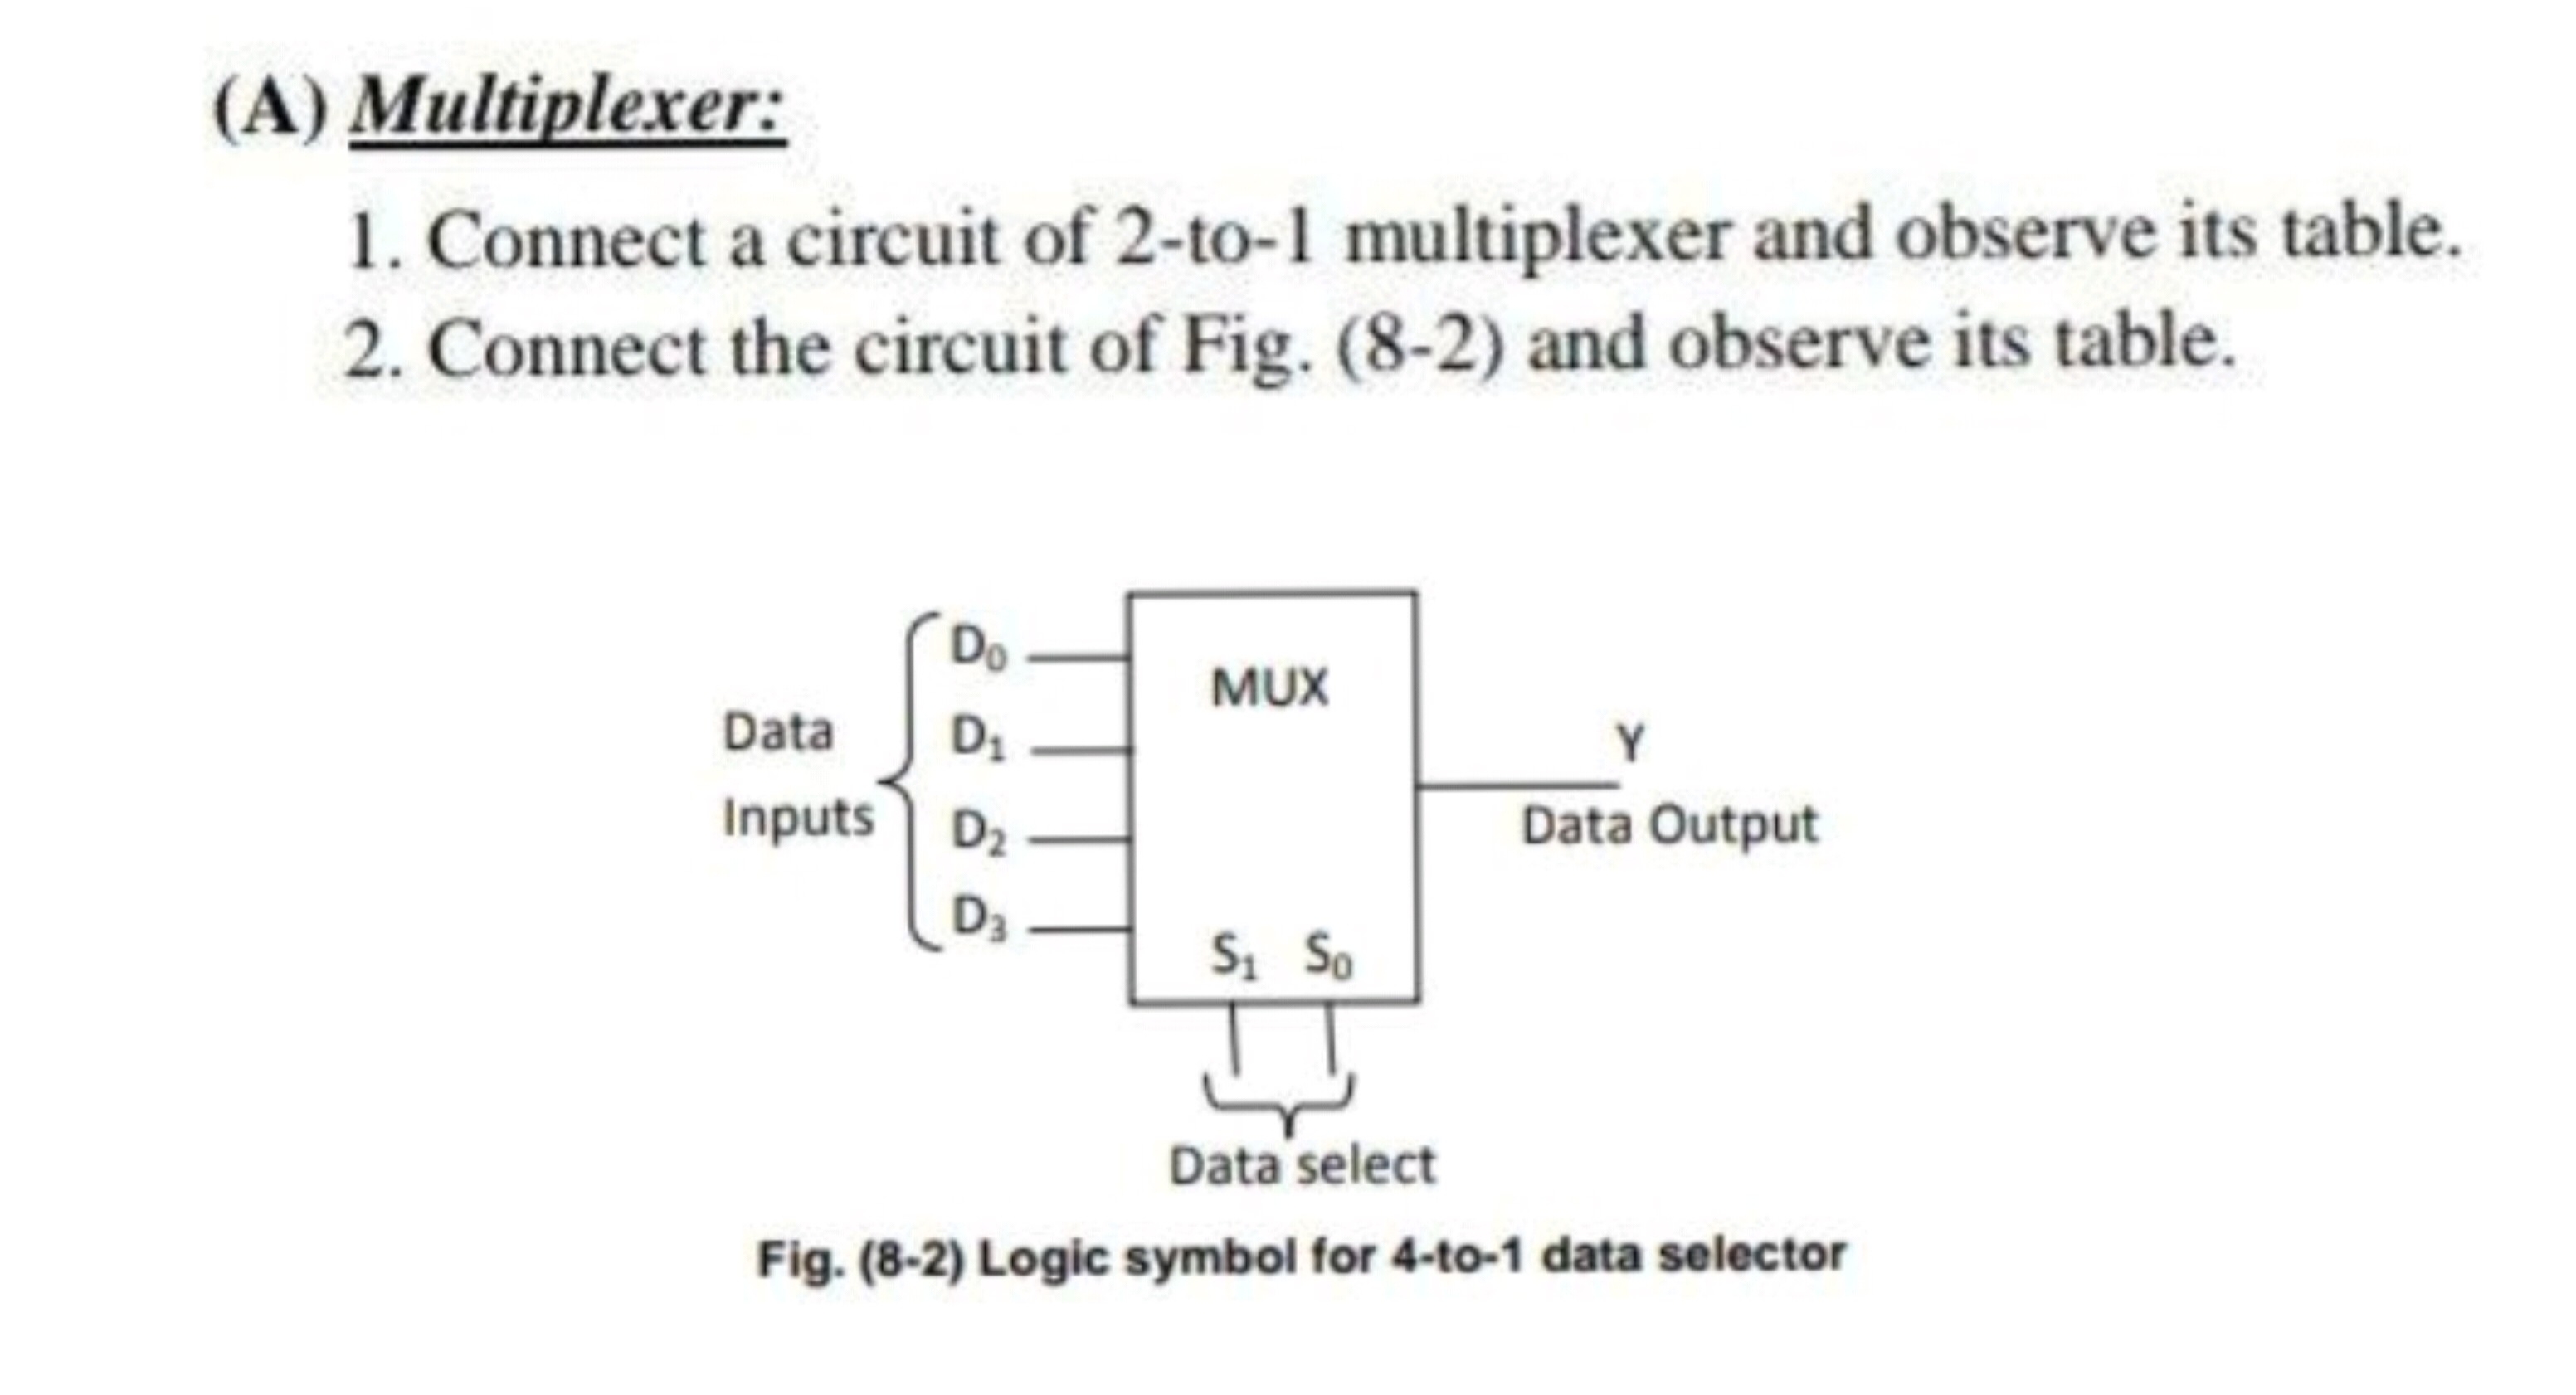 1. Connect a circuit of 2-to-1 multiplexer and observe its table.
2. Connect the circuit of Fig. (8-2) and observe its table.
